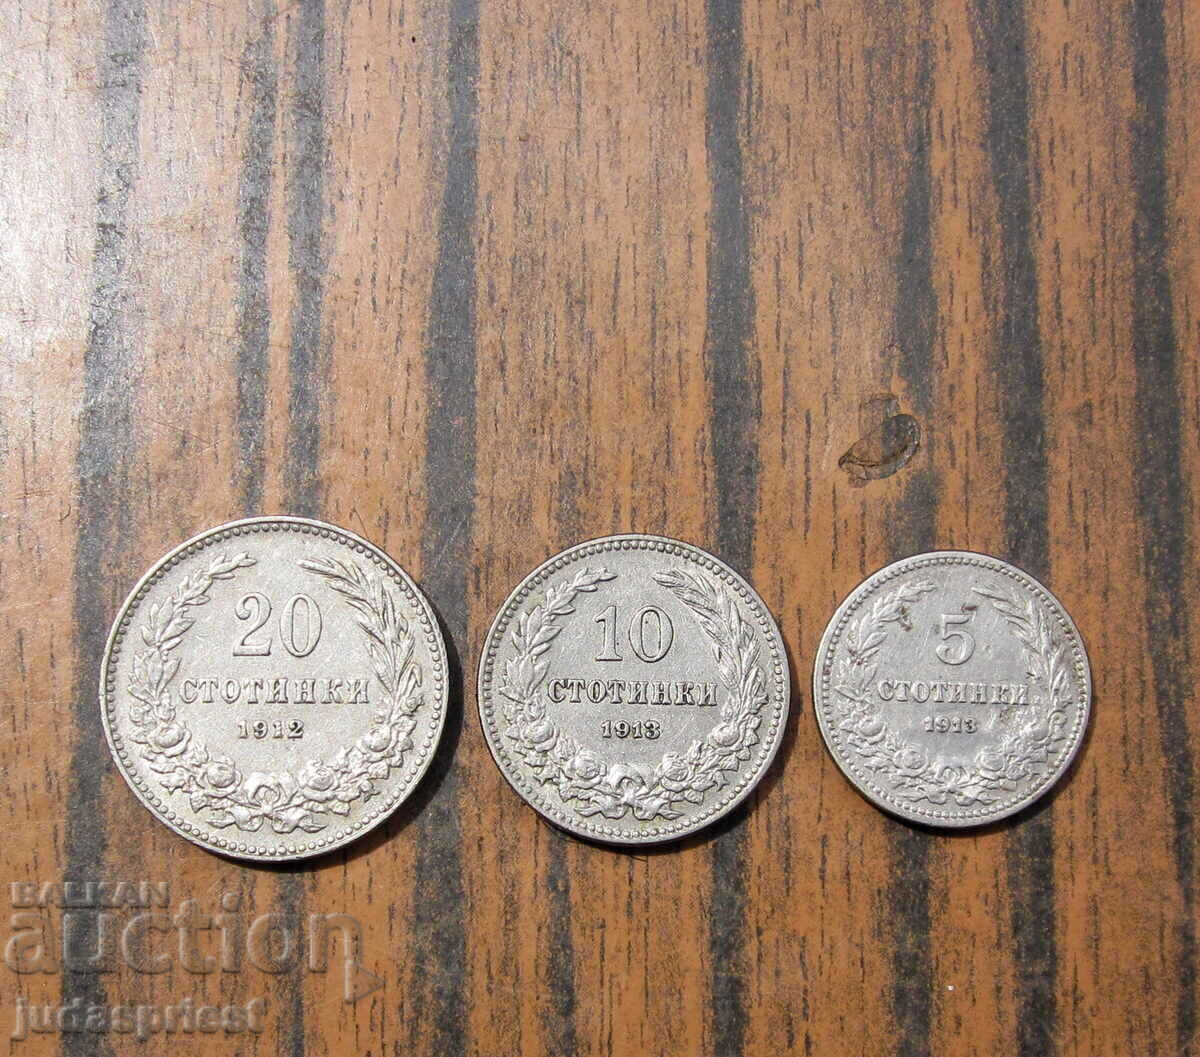 Kingdom of Bulgaria coin lot 5 10 20 cents from 1913